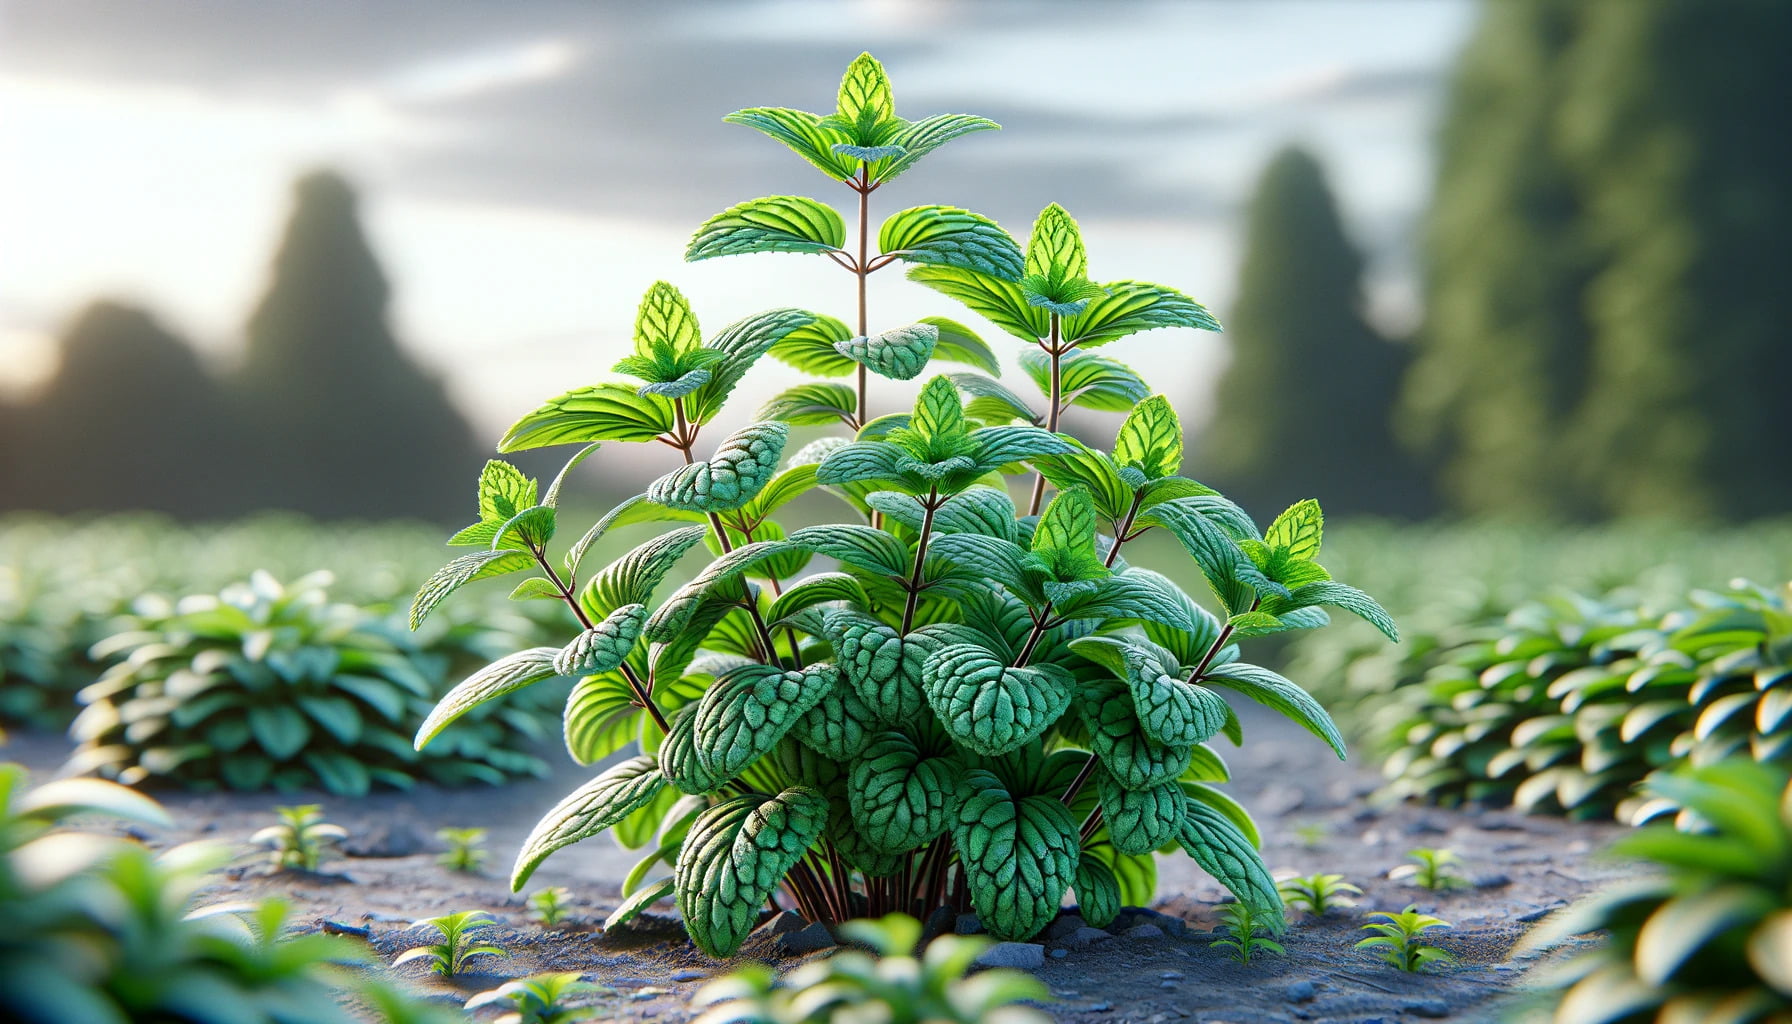 A photorealistic image of a peppermint plant in a landscape format.